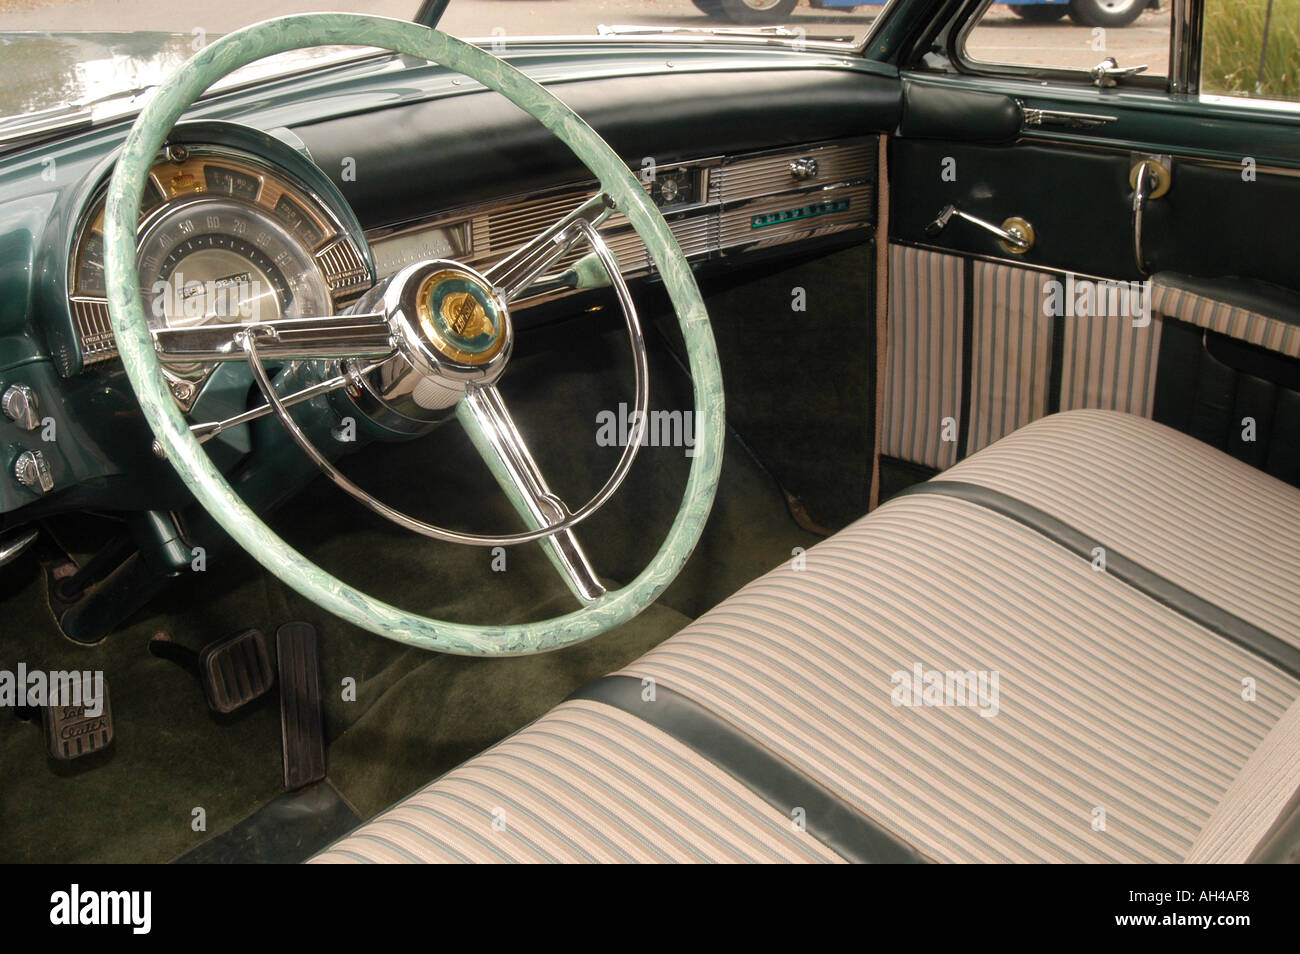 Chrysler Town And Country Interior Stock Photo 1133303 Alamy